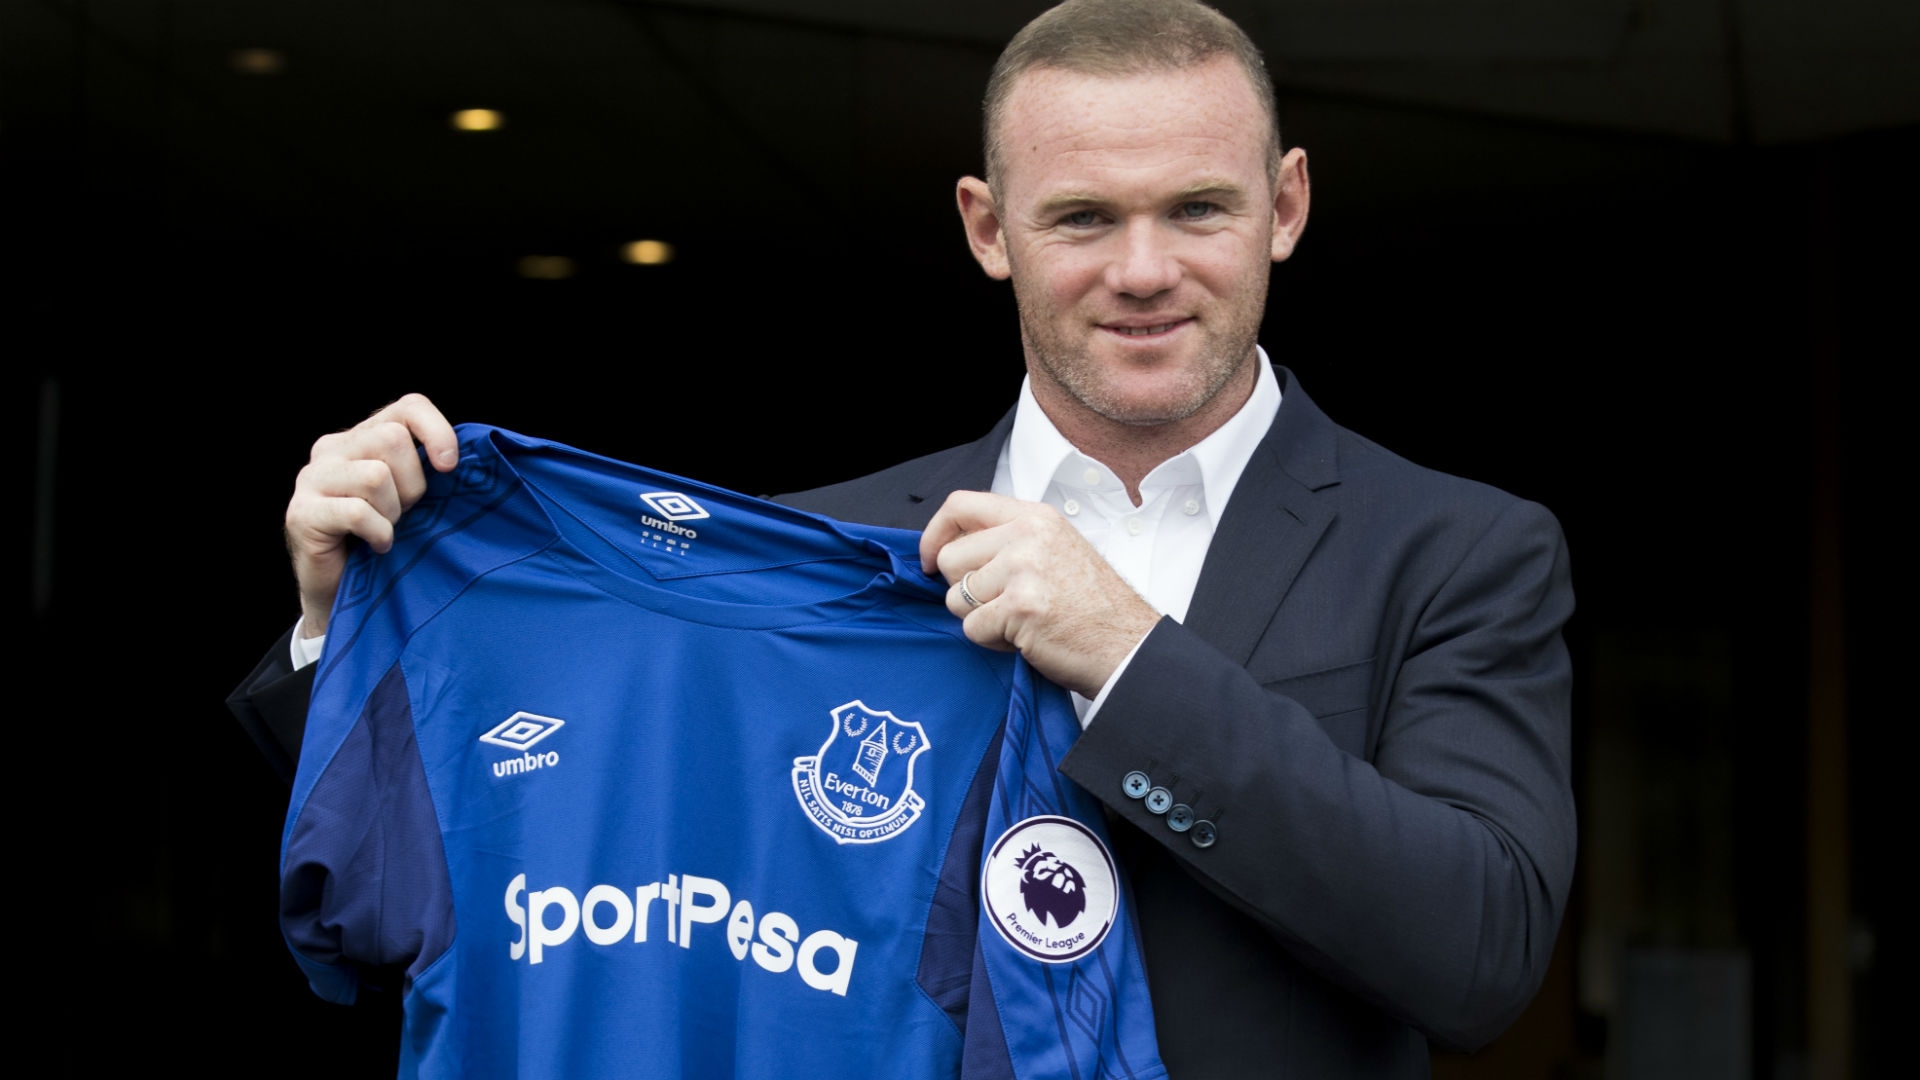 The England international now admits that this was the most difficult period of his career. His return to Everton, his first ever club, is meant to offer Rooney the chance to play more and remind fans of his abilities.